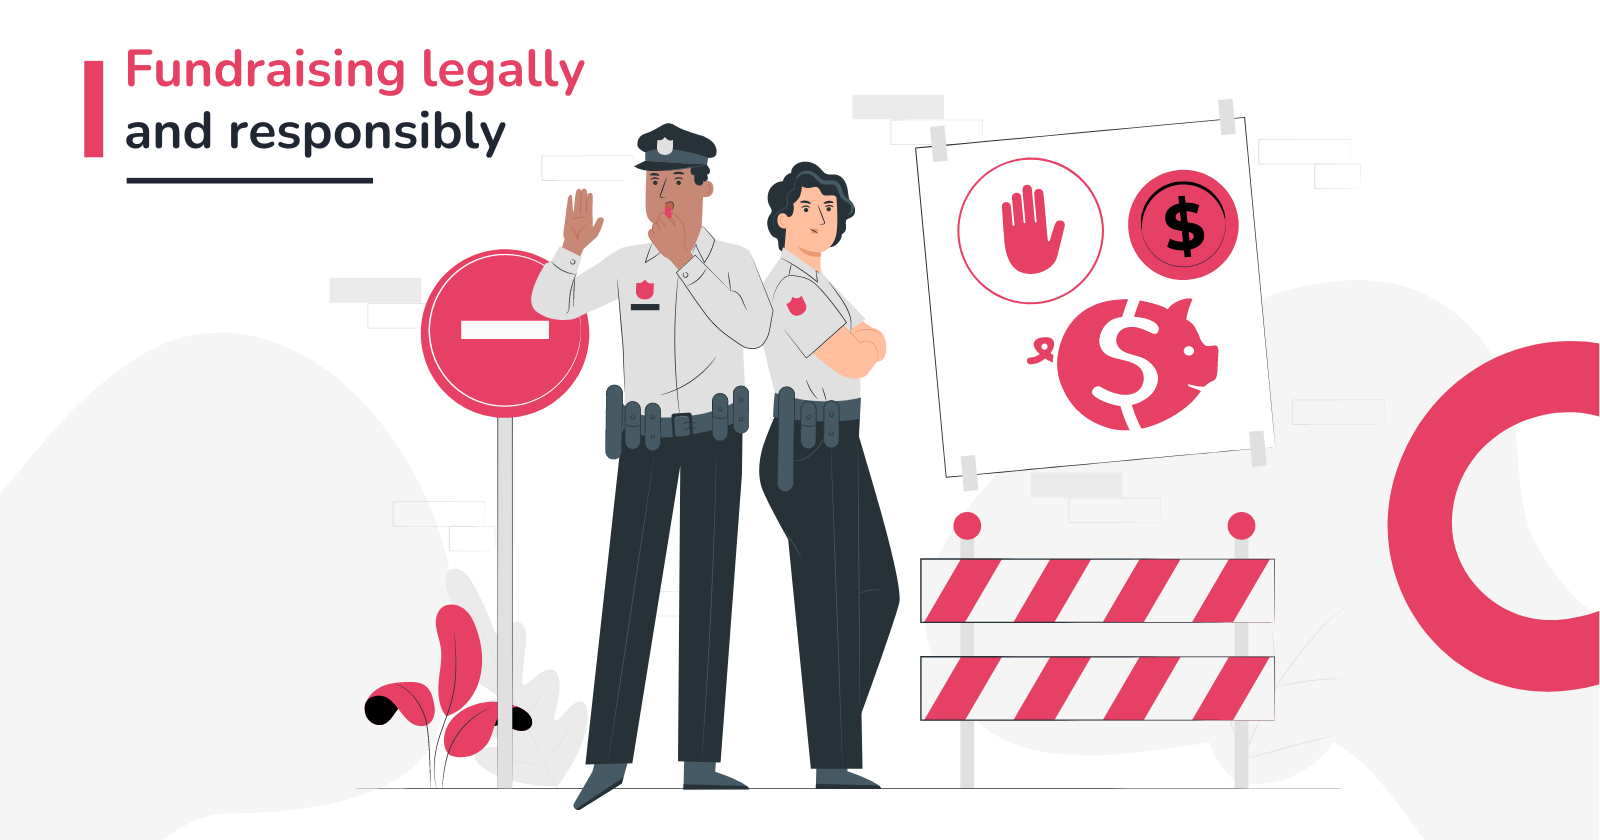 Fundraising legally and responsibly